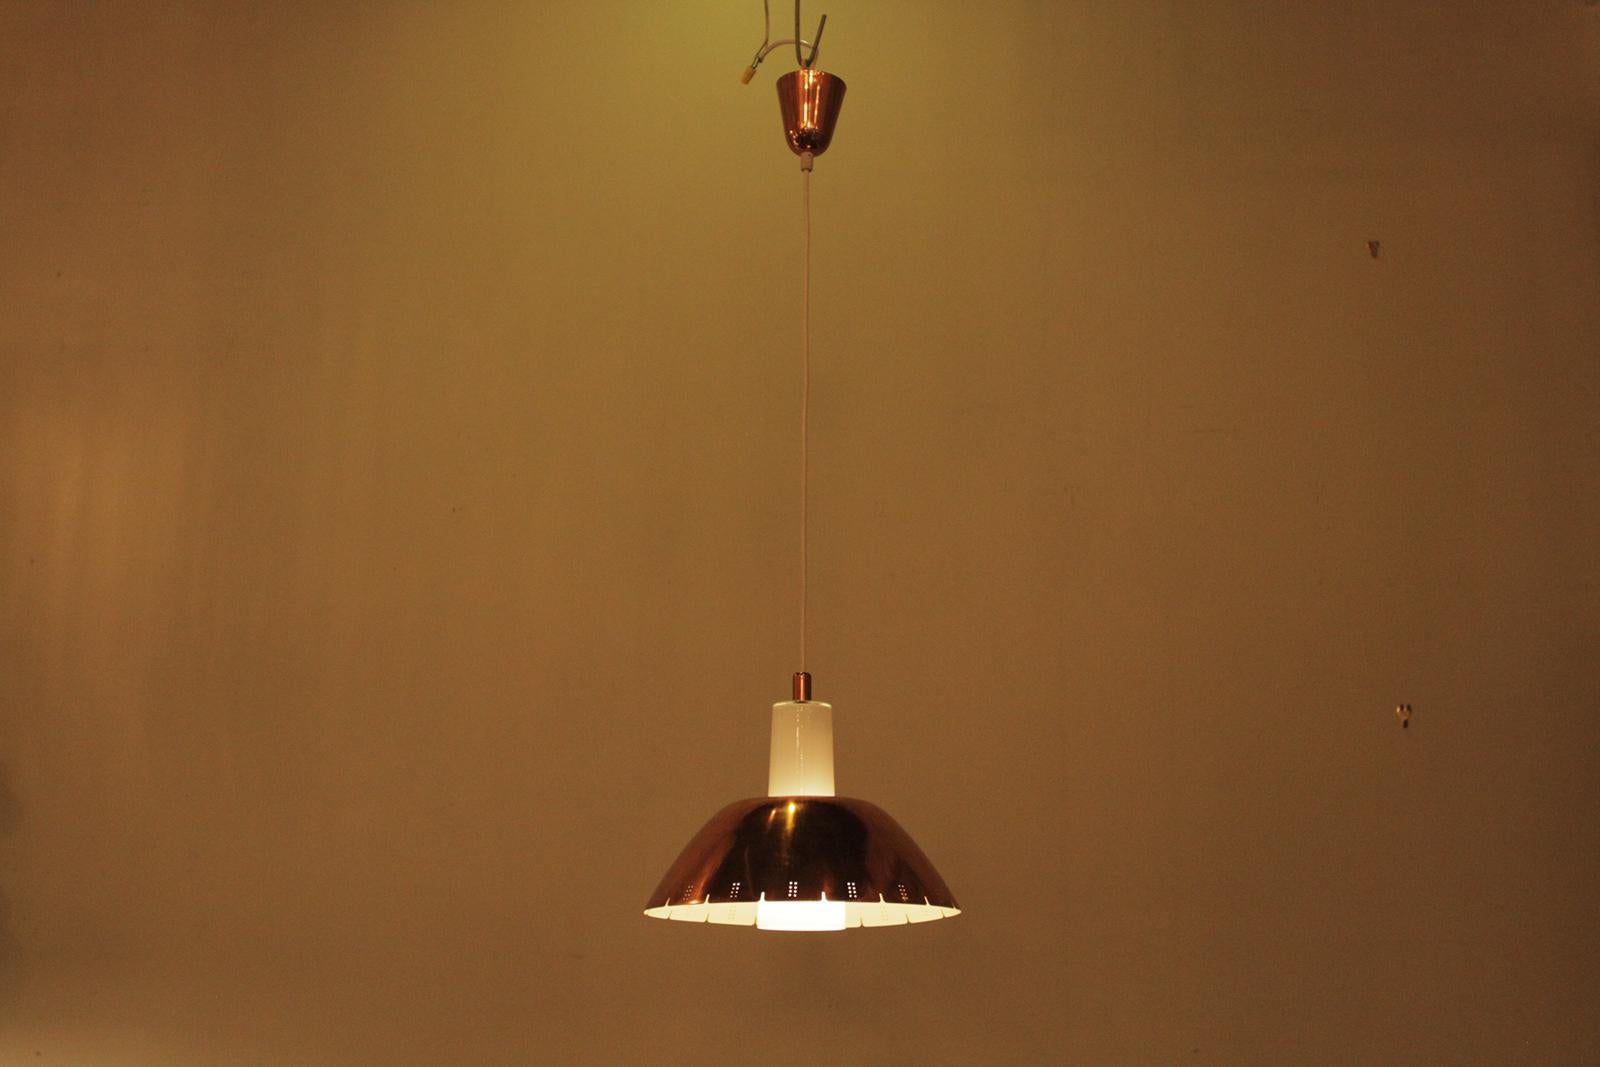 Mid-Century Modern Midcentury Chandelier by Paavo Tynell for Idman Oy mod.k2-20 Finland, 1954